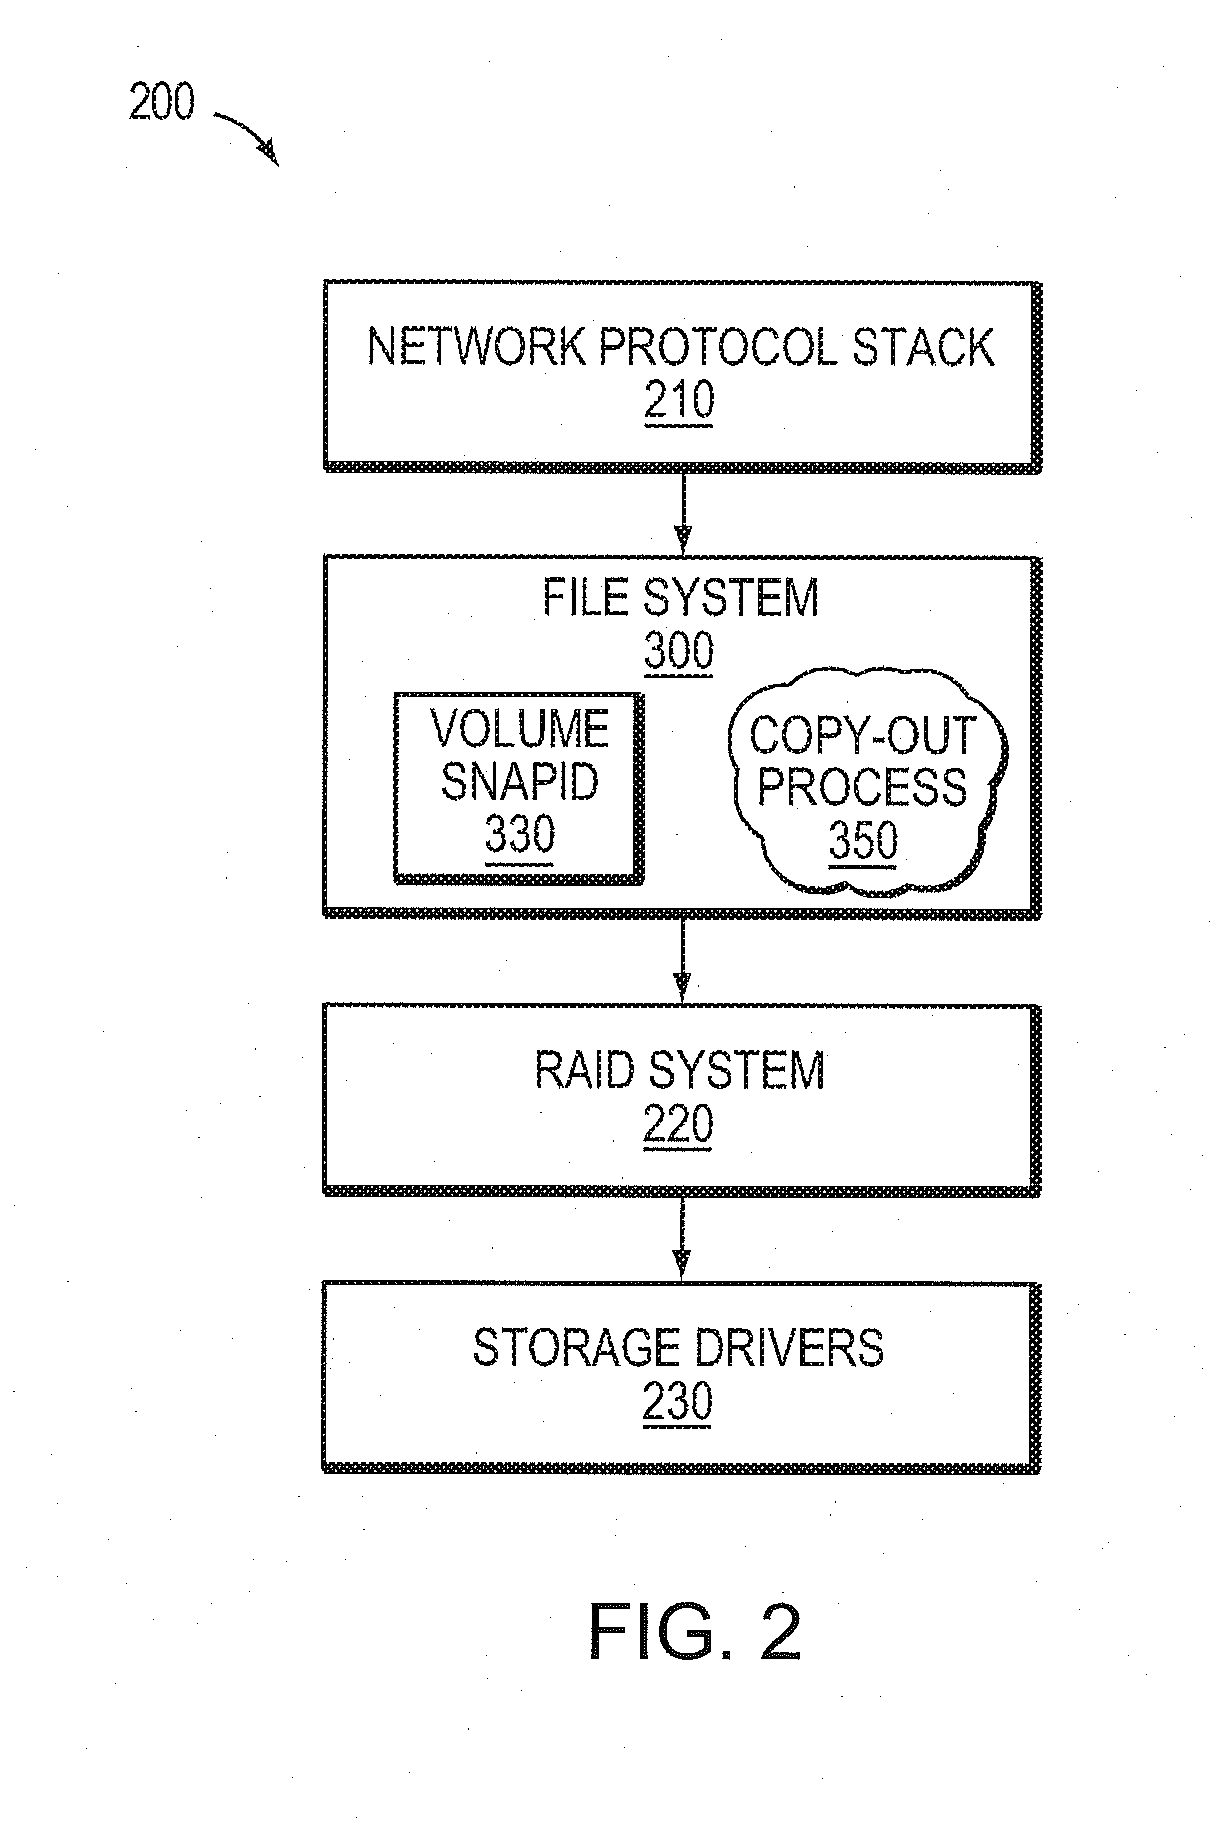 Maintaining snapshot and active file system metadata in an on-disk structure of a fle system